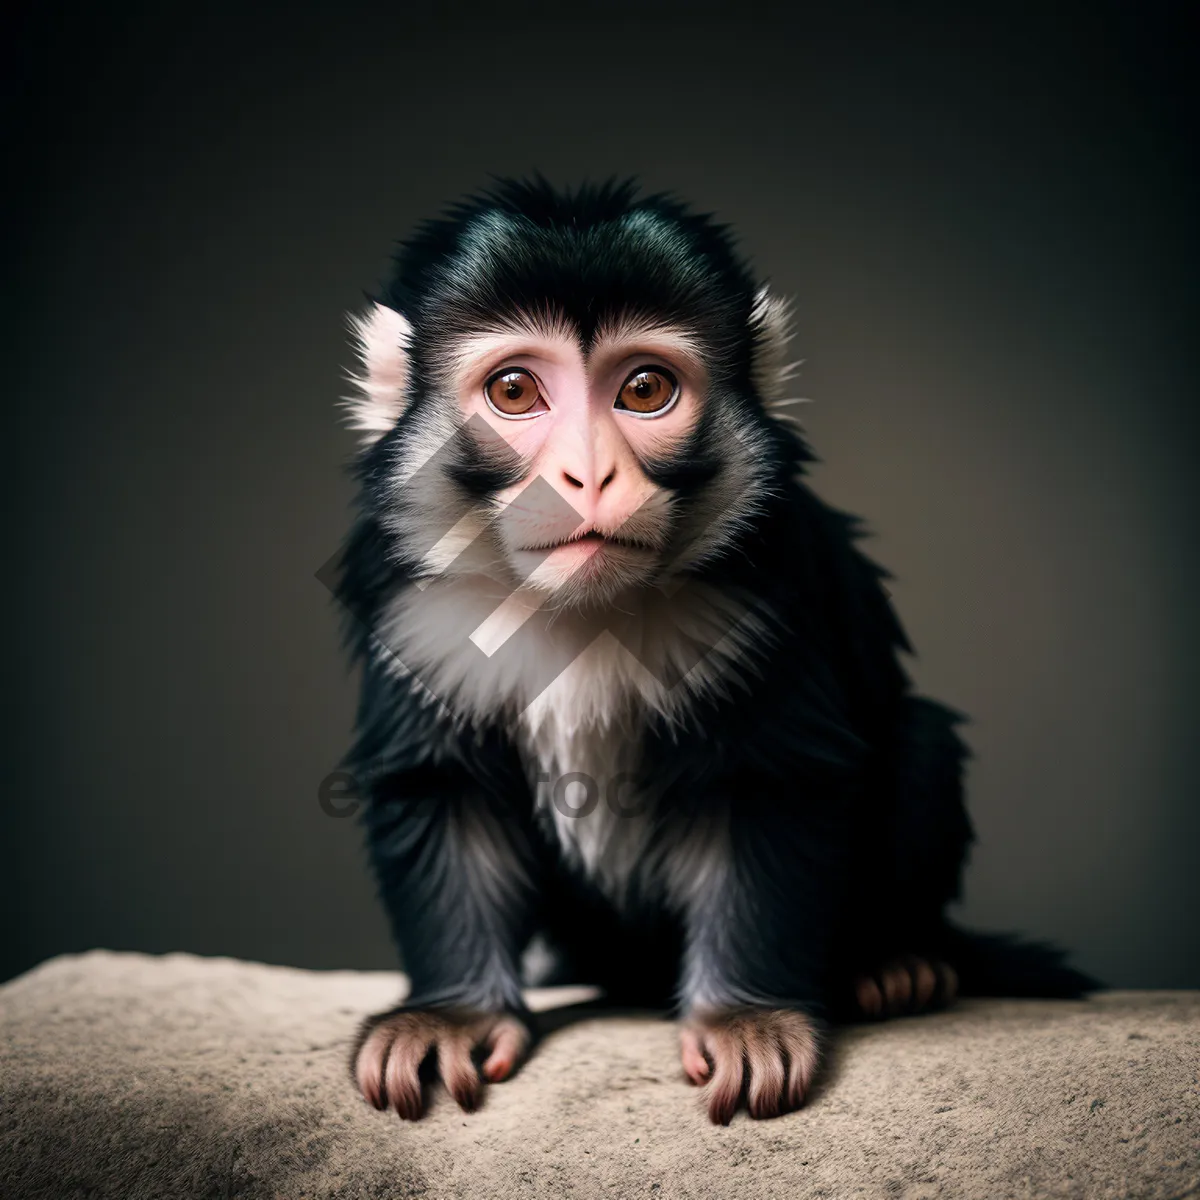 Picture of Adorable Baby Monkey with Stunning Primate Features